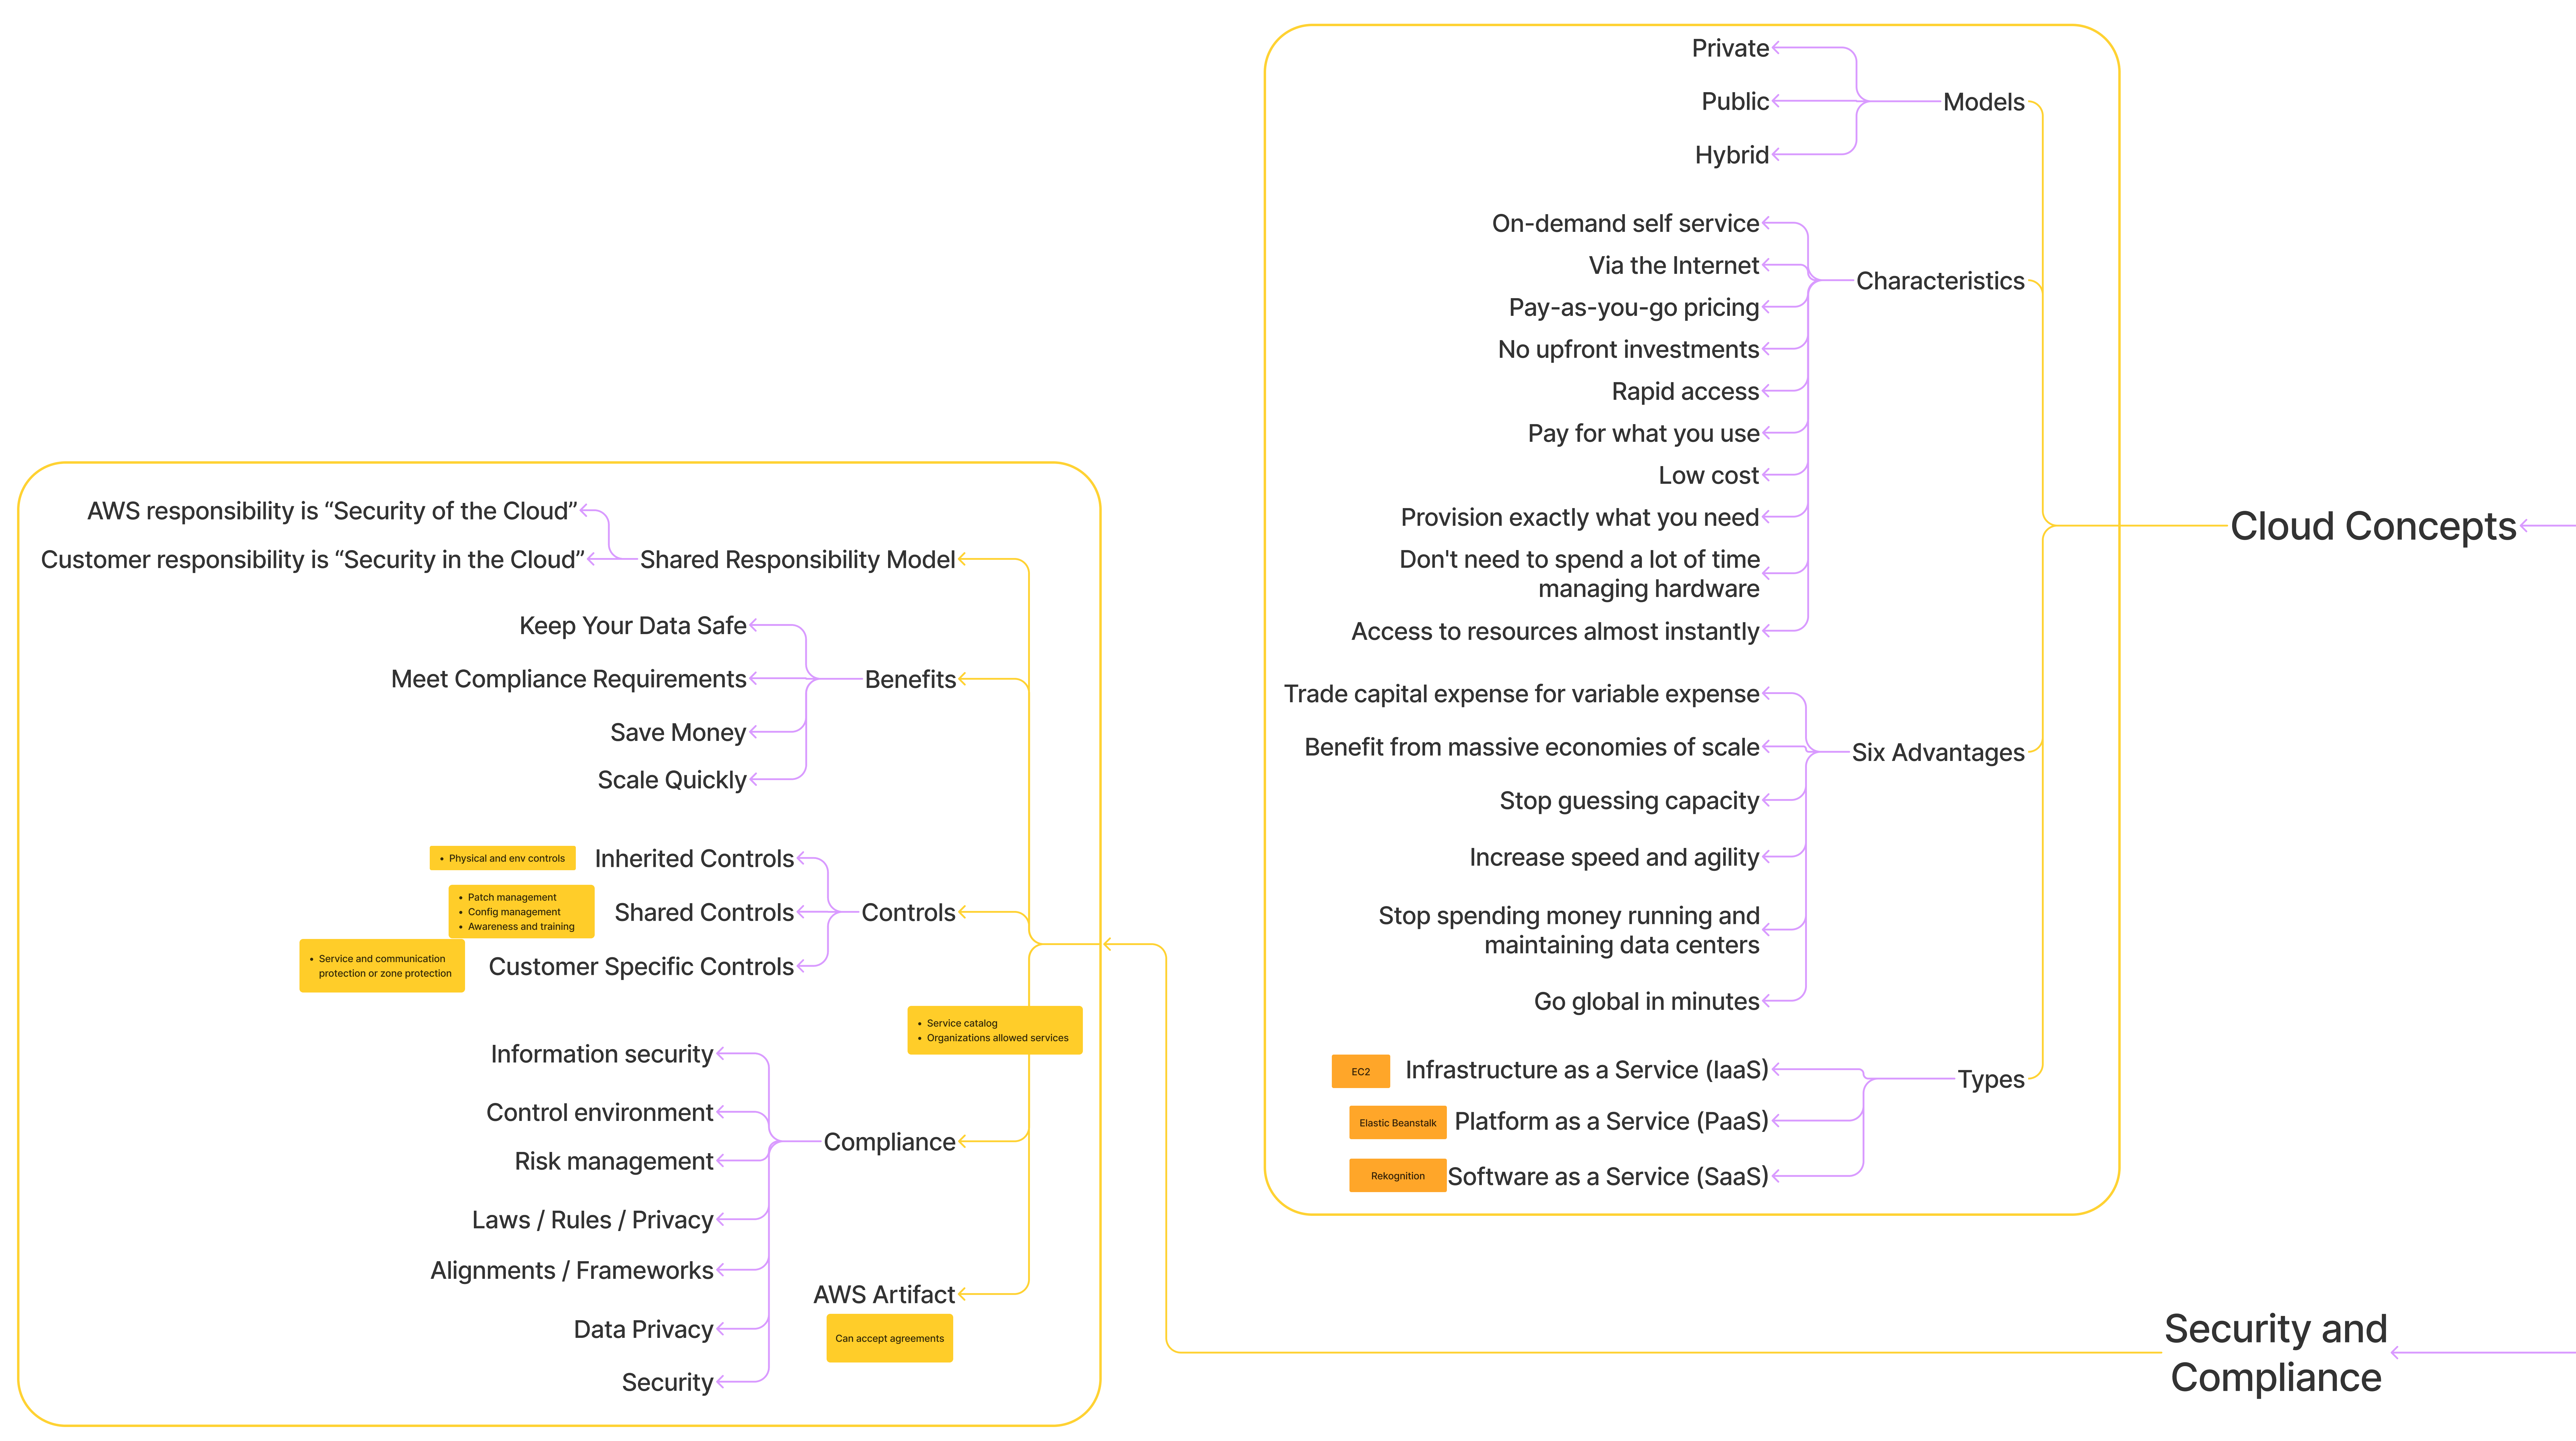 Mind Map - Cloud Concepts AND Security and Compliance